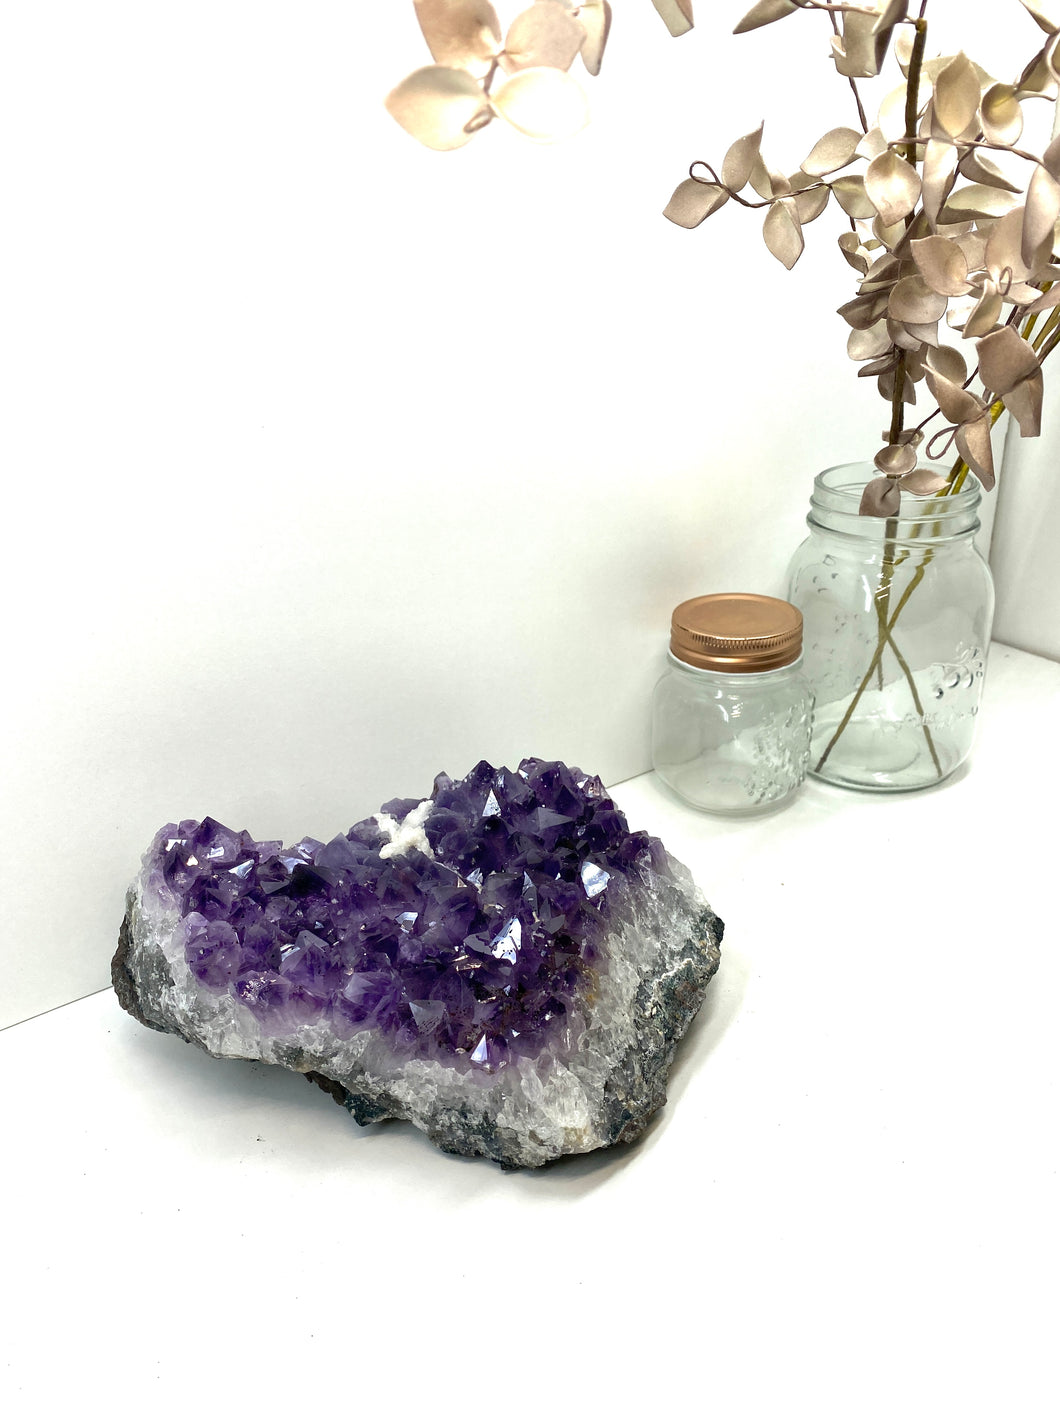 Amethyst Crystal on display stand - large piece with removable display stand